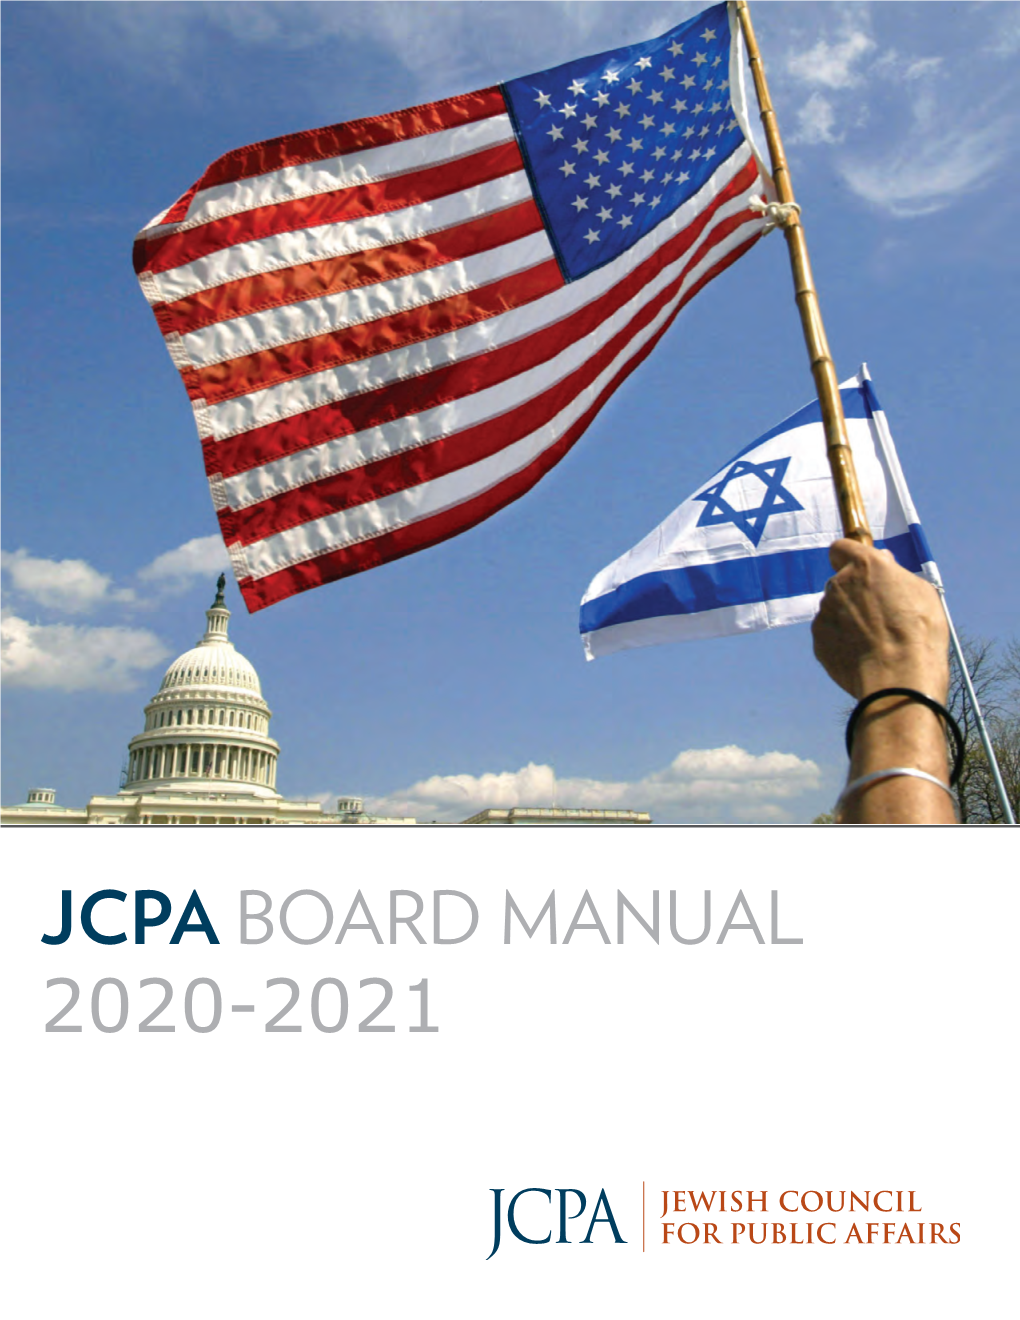 JCPA BOARD MANUAL 2020-2021 September 2020 Dear JCPA Leader: Congratulations! I Am Excited to Be Working with You at the Jewish Council for Public Affairs (JCPA)